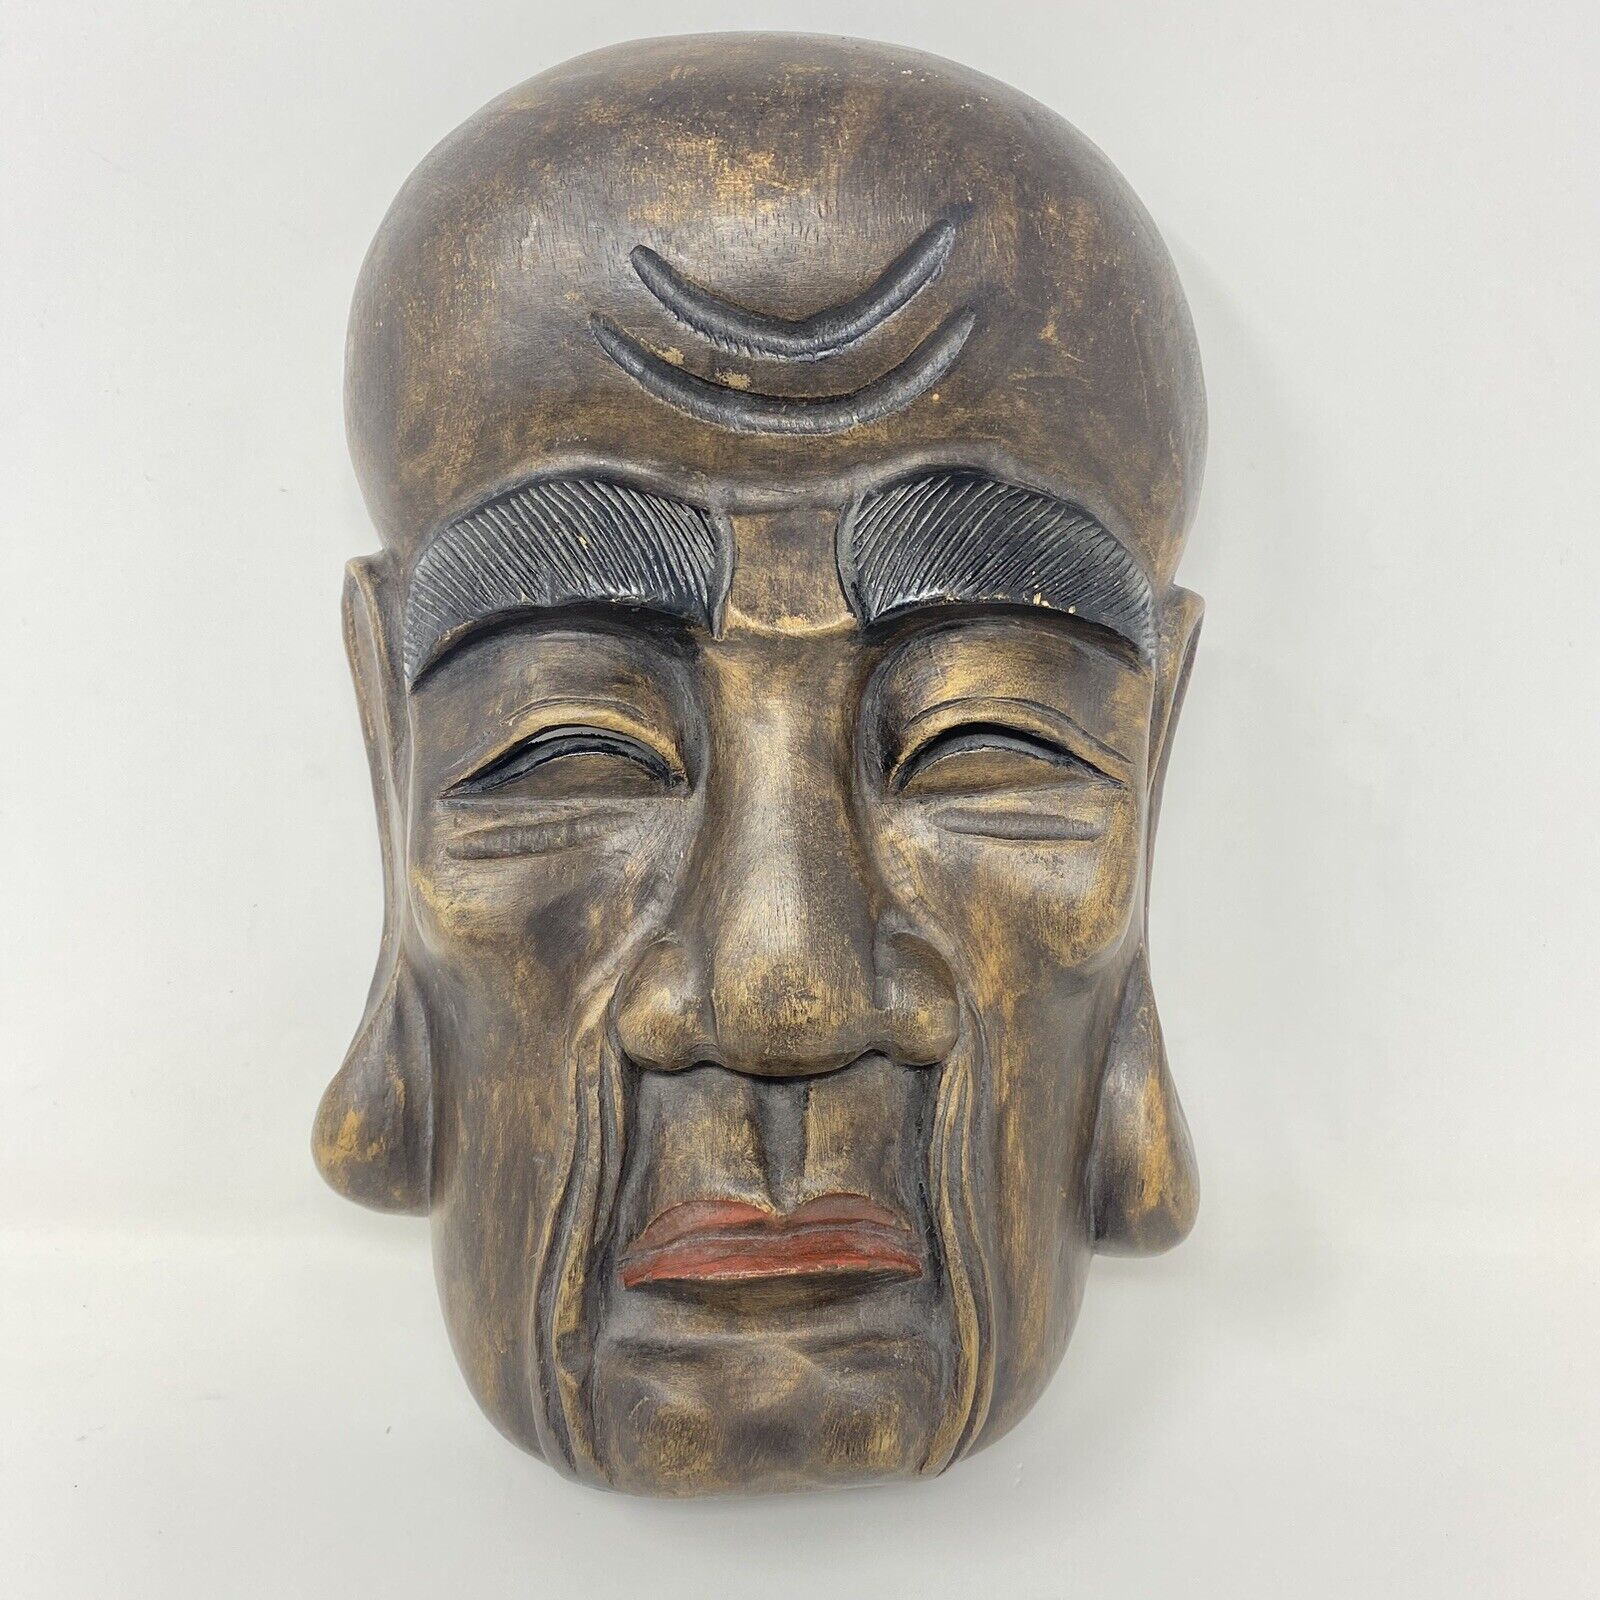 Vintage Antique Hand Carved Wooden Asian Mask Japan? Chinese?